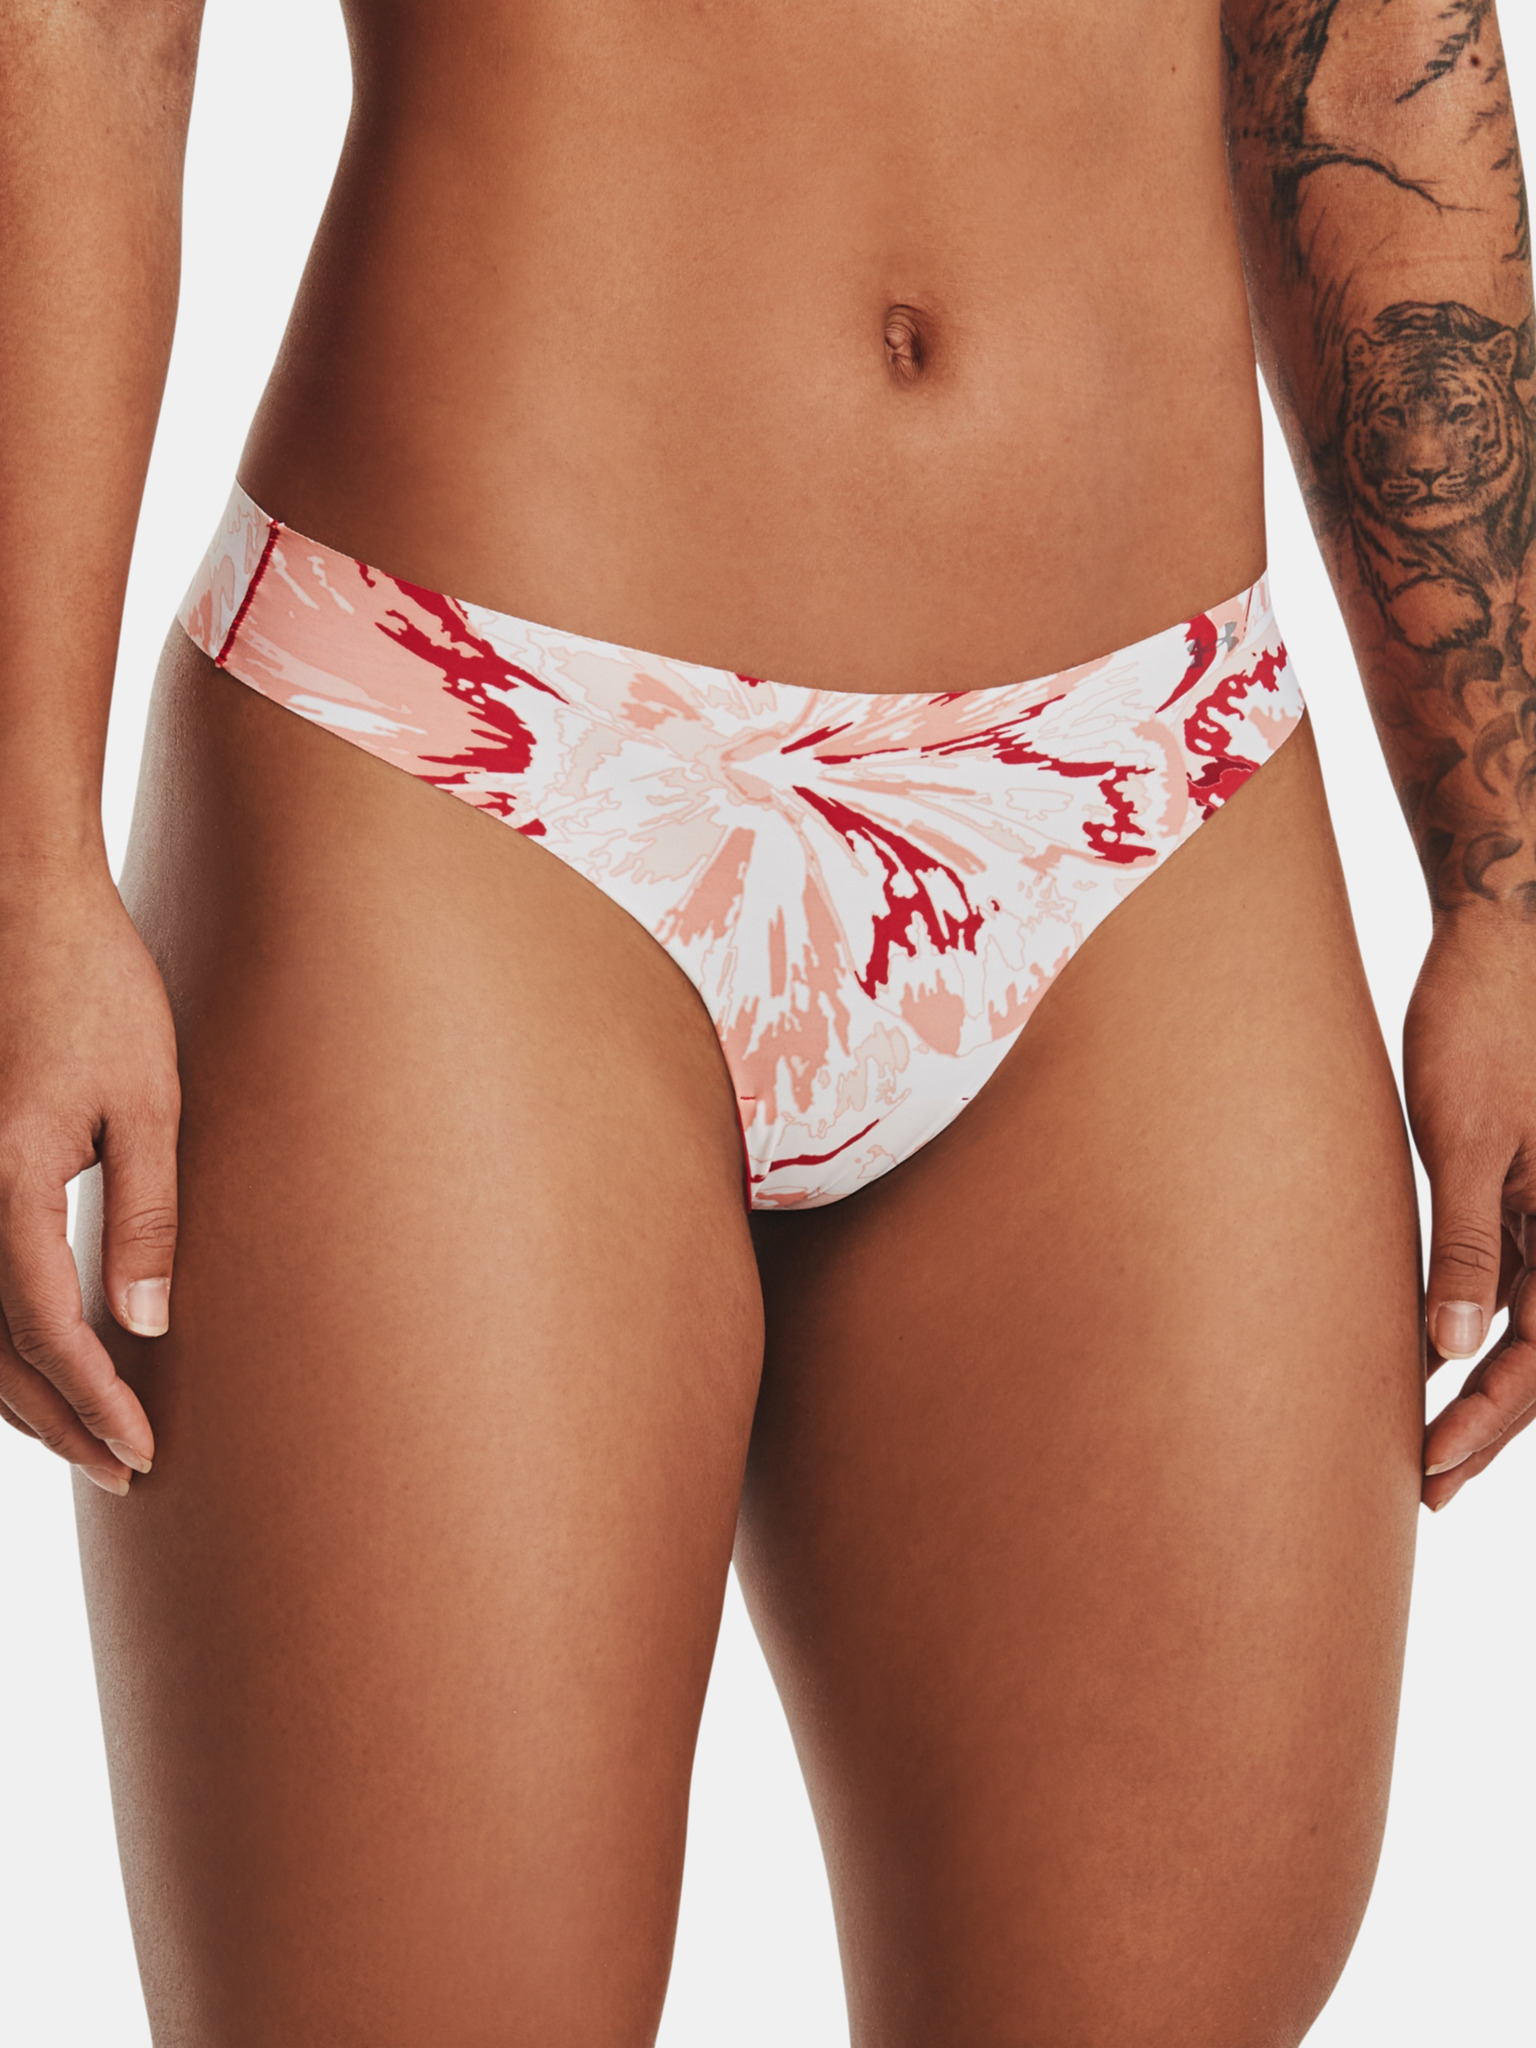 Womens panties Under Armour PS THONG 3PACK PRINT W pink